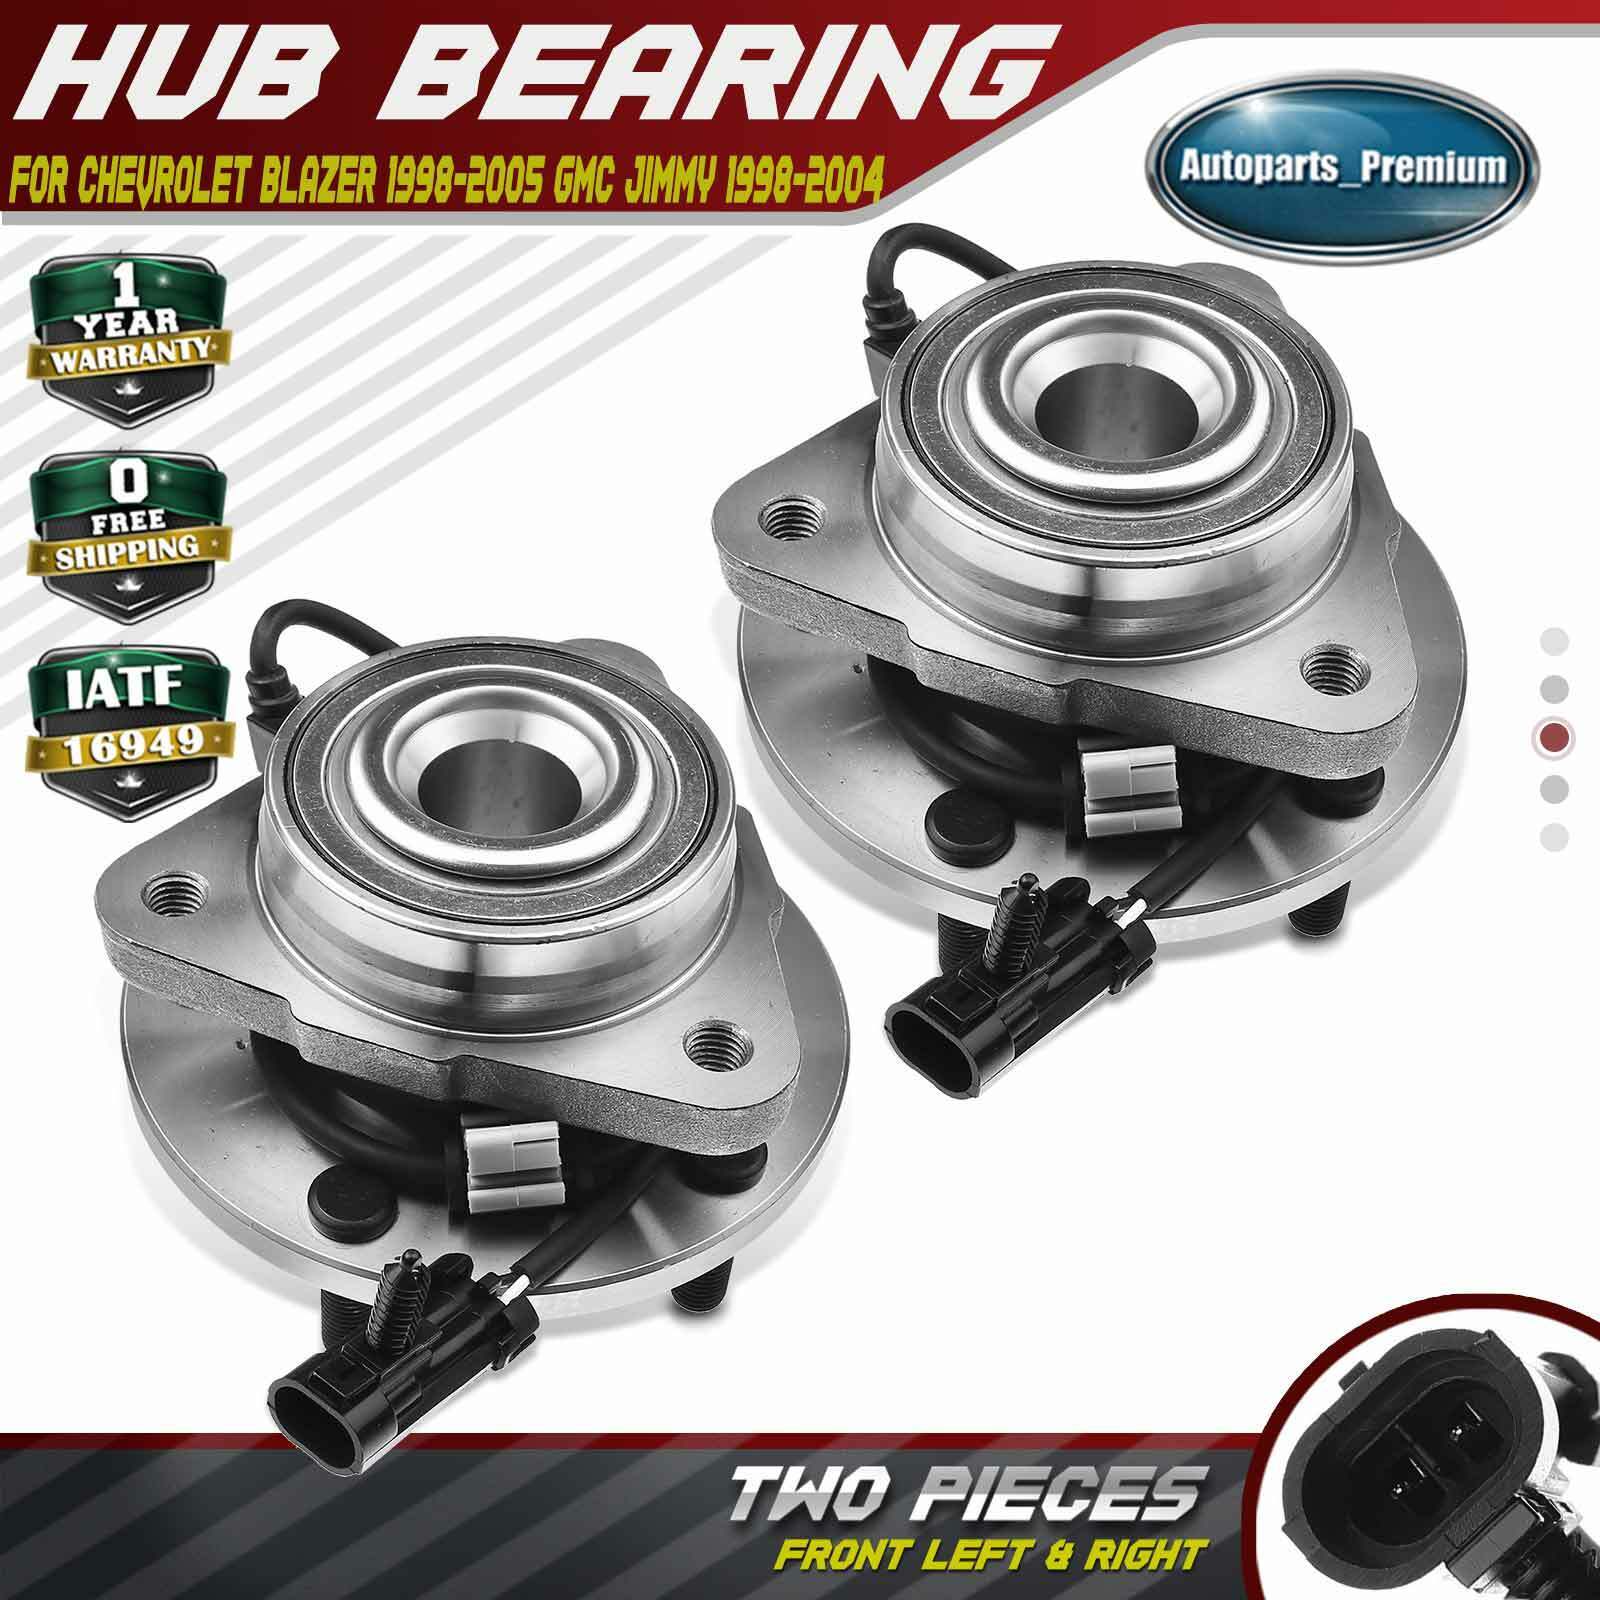 2x Front Wheel Hub & Bearing Assembly for Chevy Blazer 98-05 GMC Jimmy 98-04 RWD